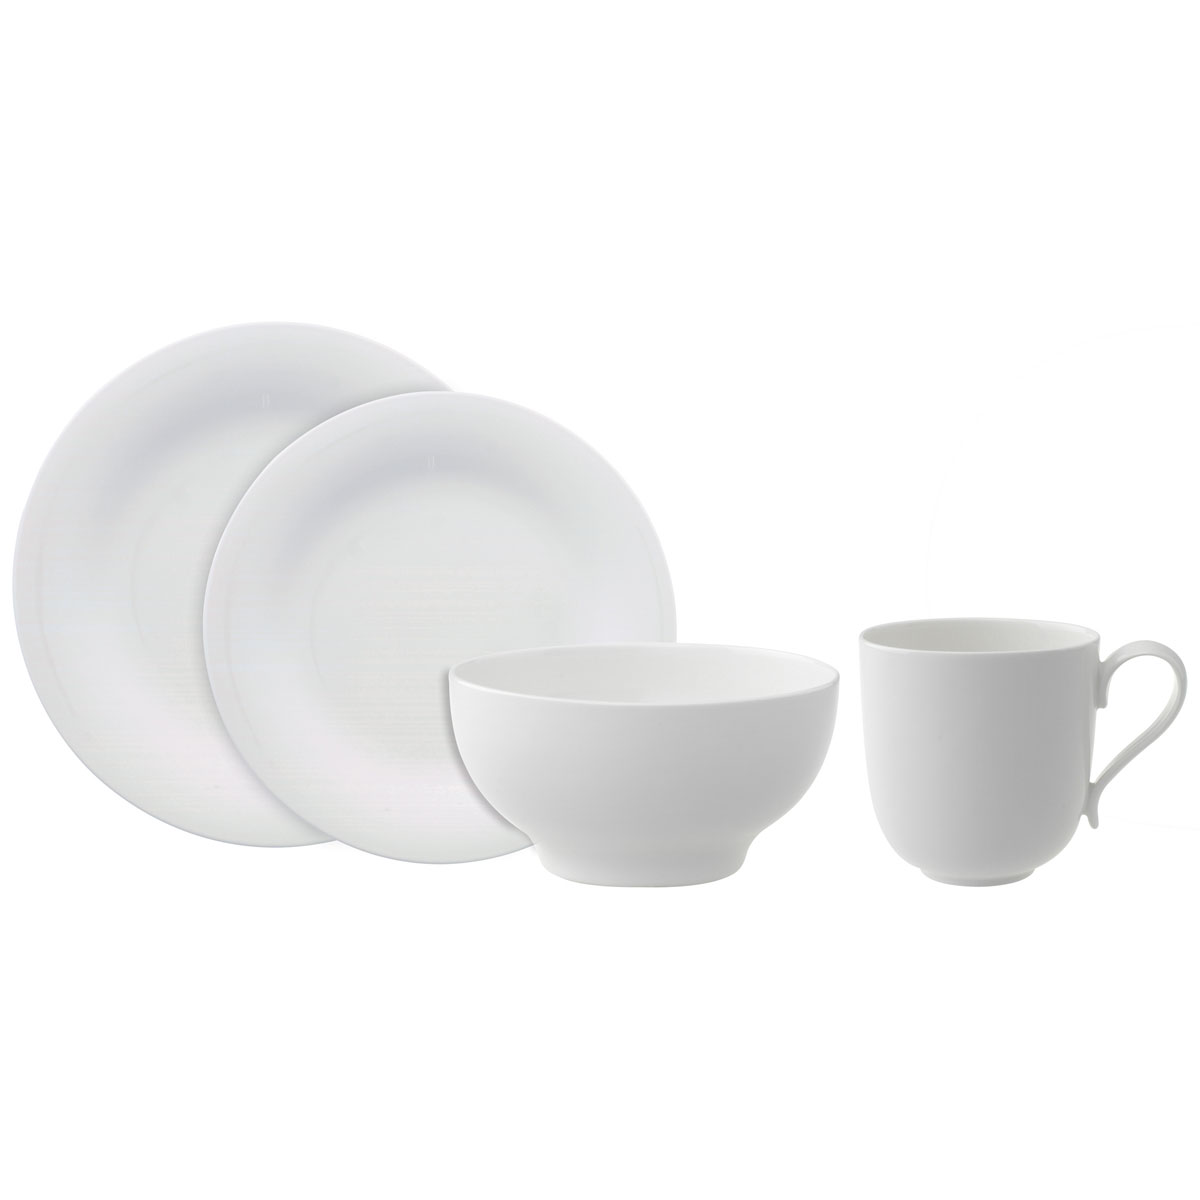 Villeroy and Boch New Cottage Basic 4 Piece Place Setting